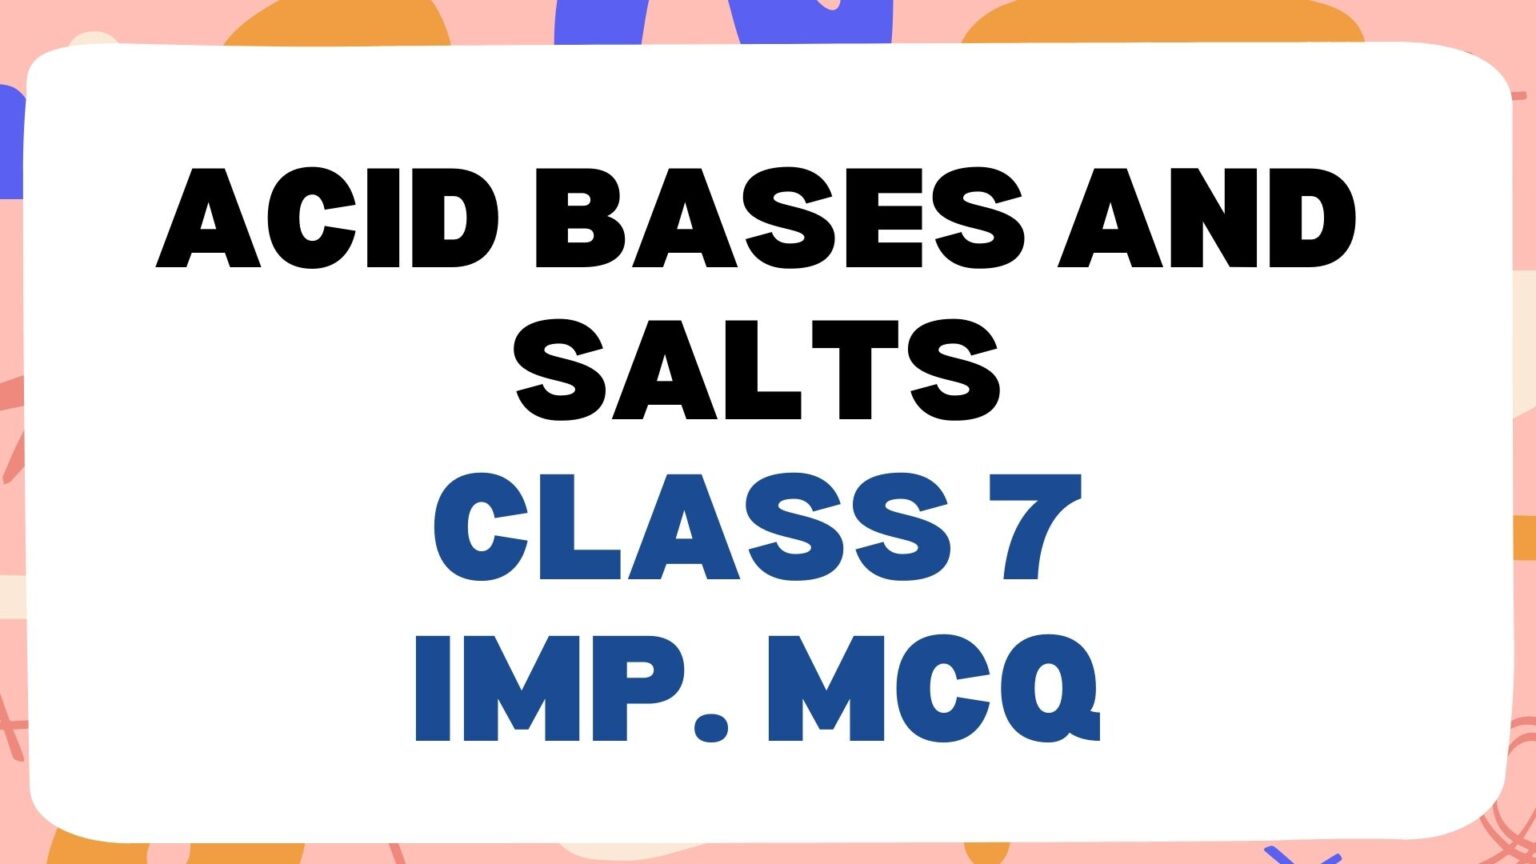 acid-bases-and-salts-class-7-mcq-with-answers-the-education-planet